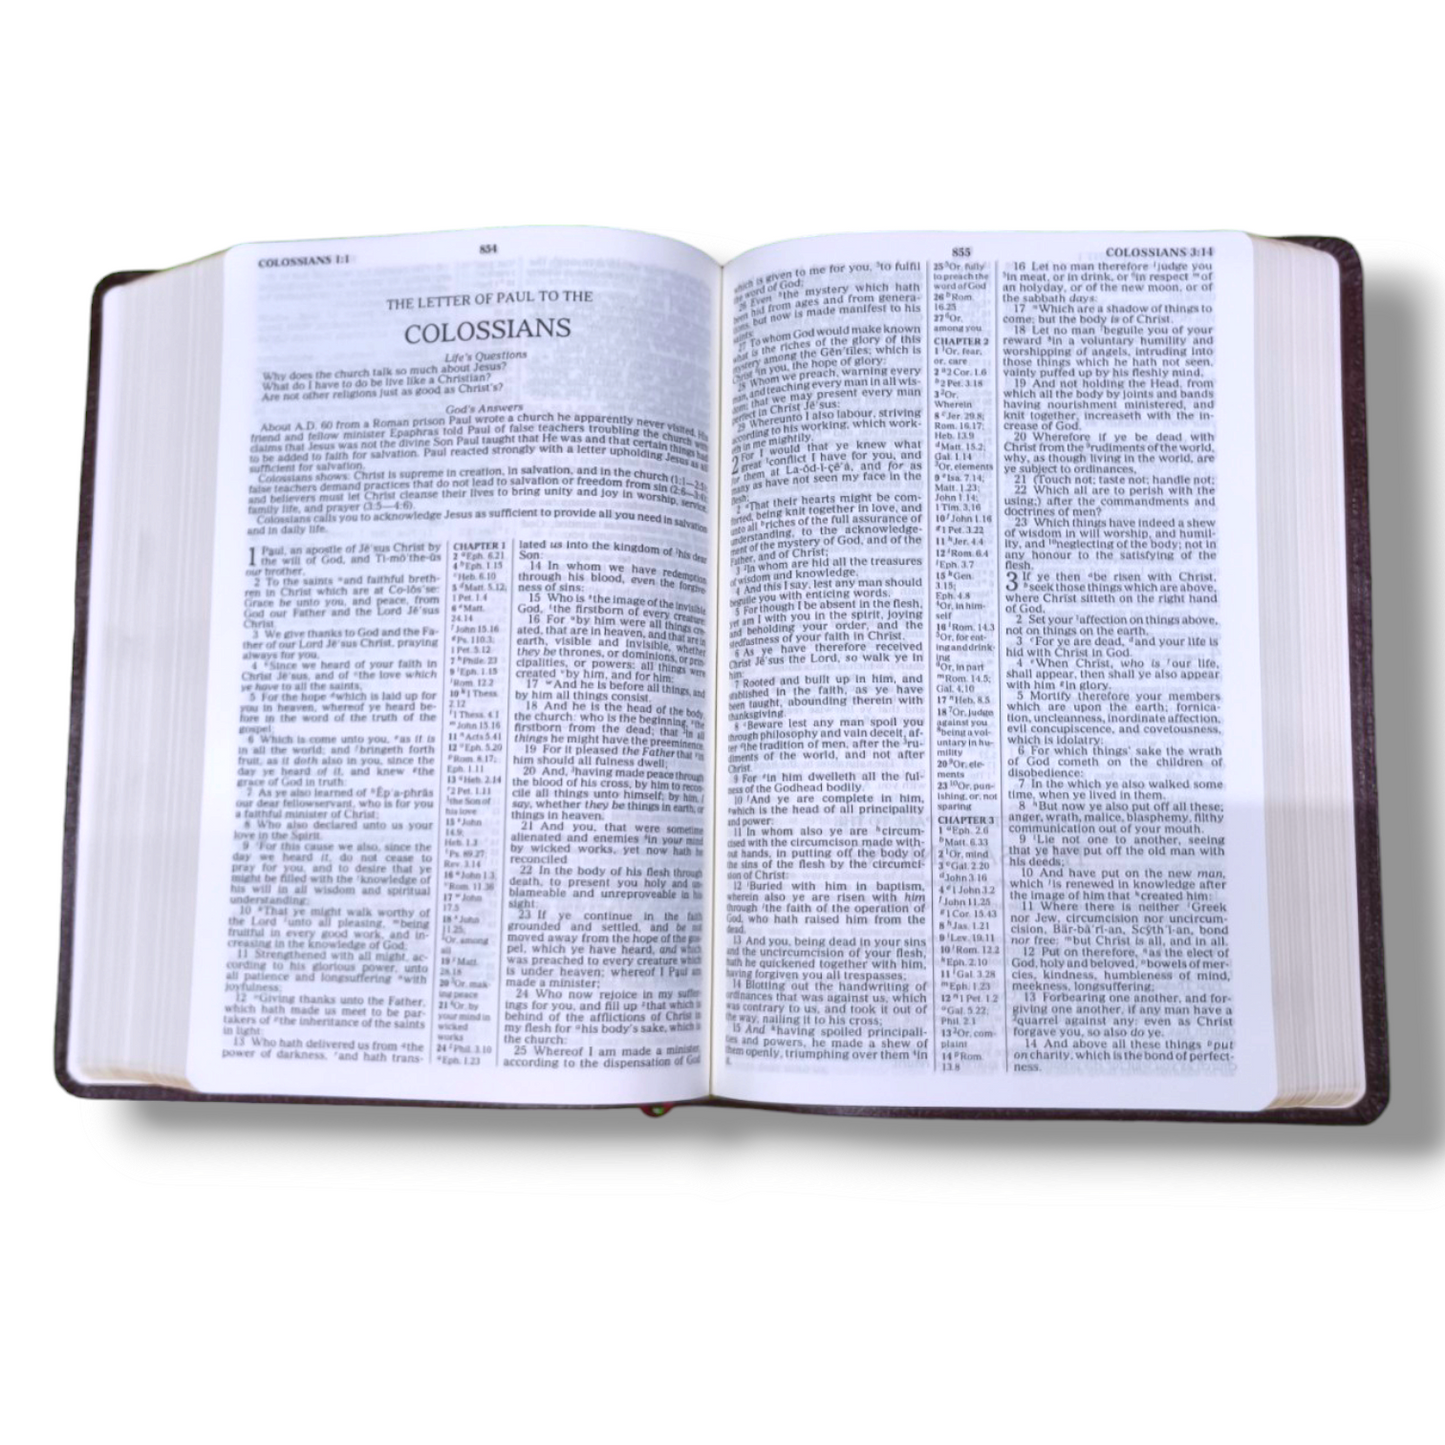 The Master Study Bible | King James Version | Black Leather Bonded | New Edition